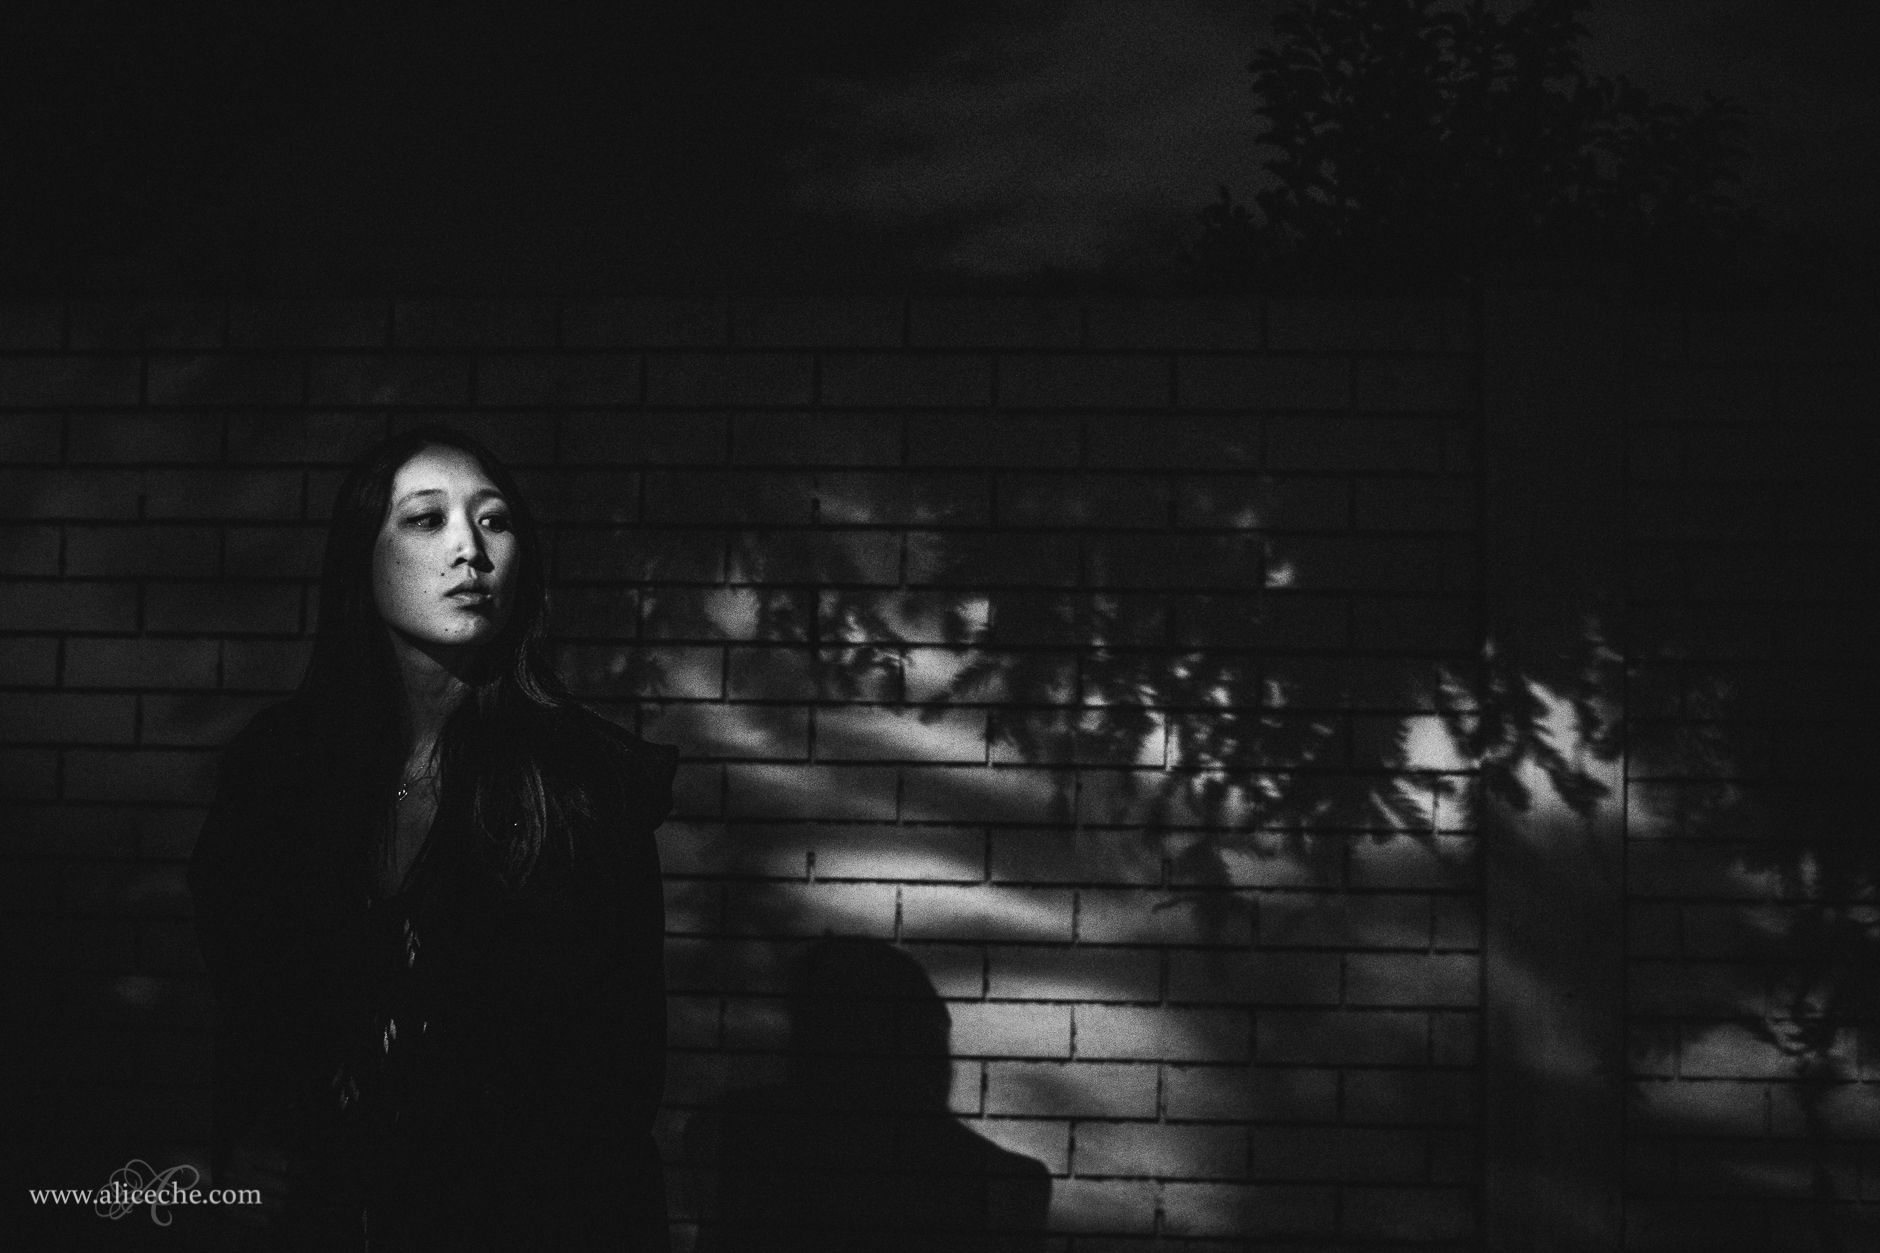 alice-che-photography-shadows-bold-with-light-black-and-white-street-light-self-portrait